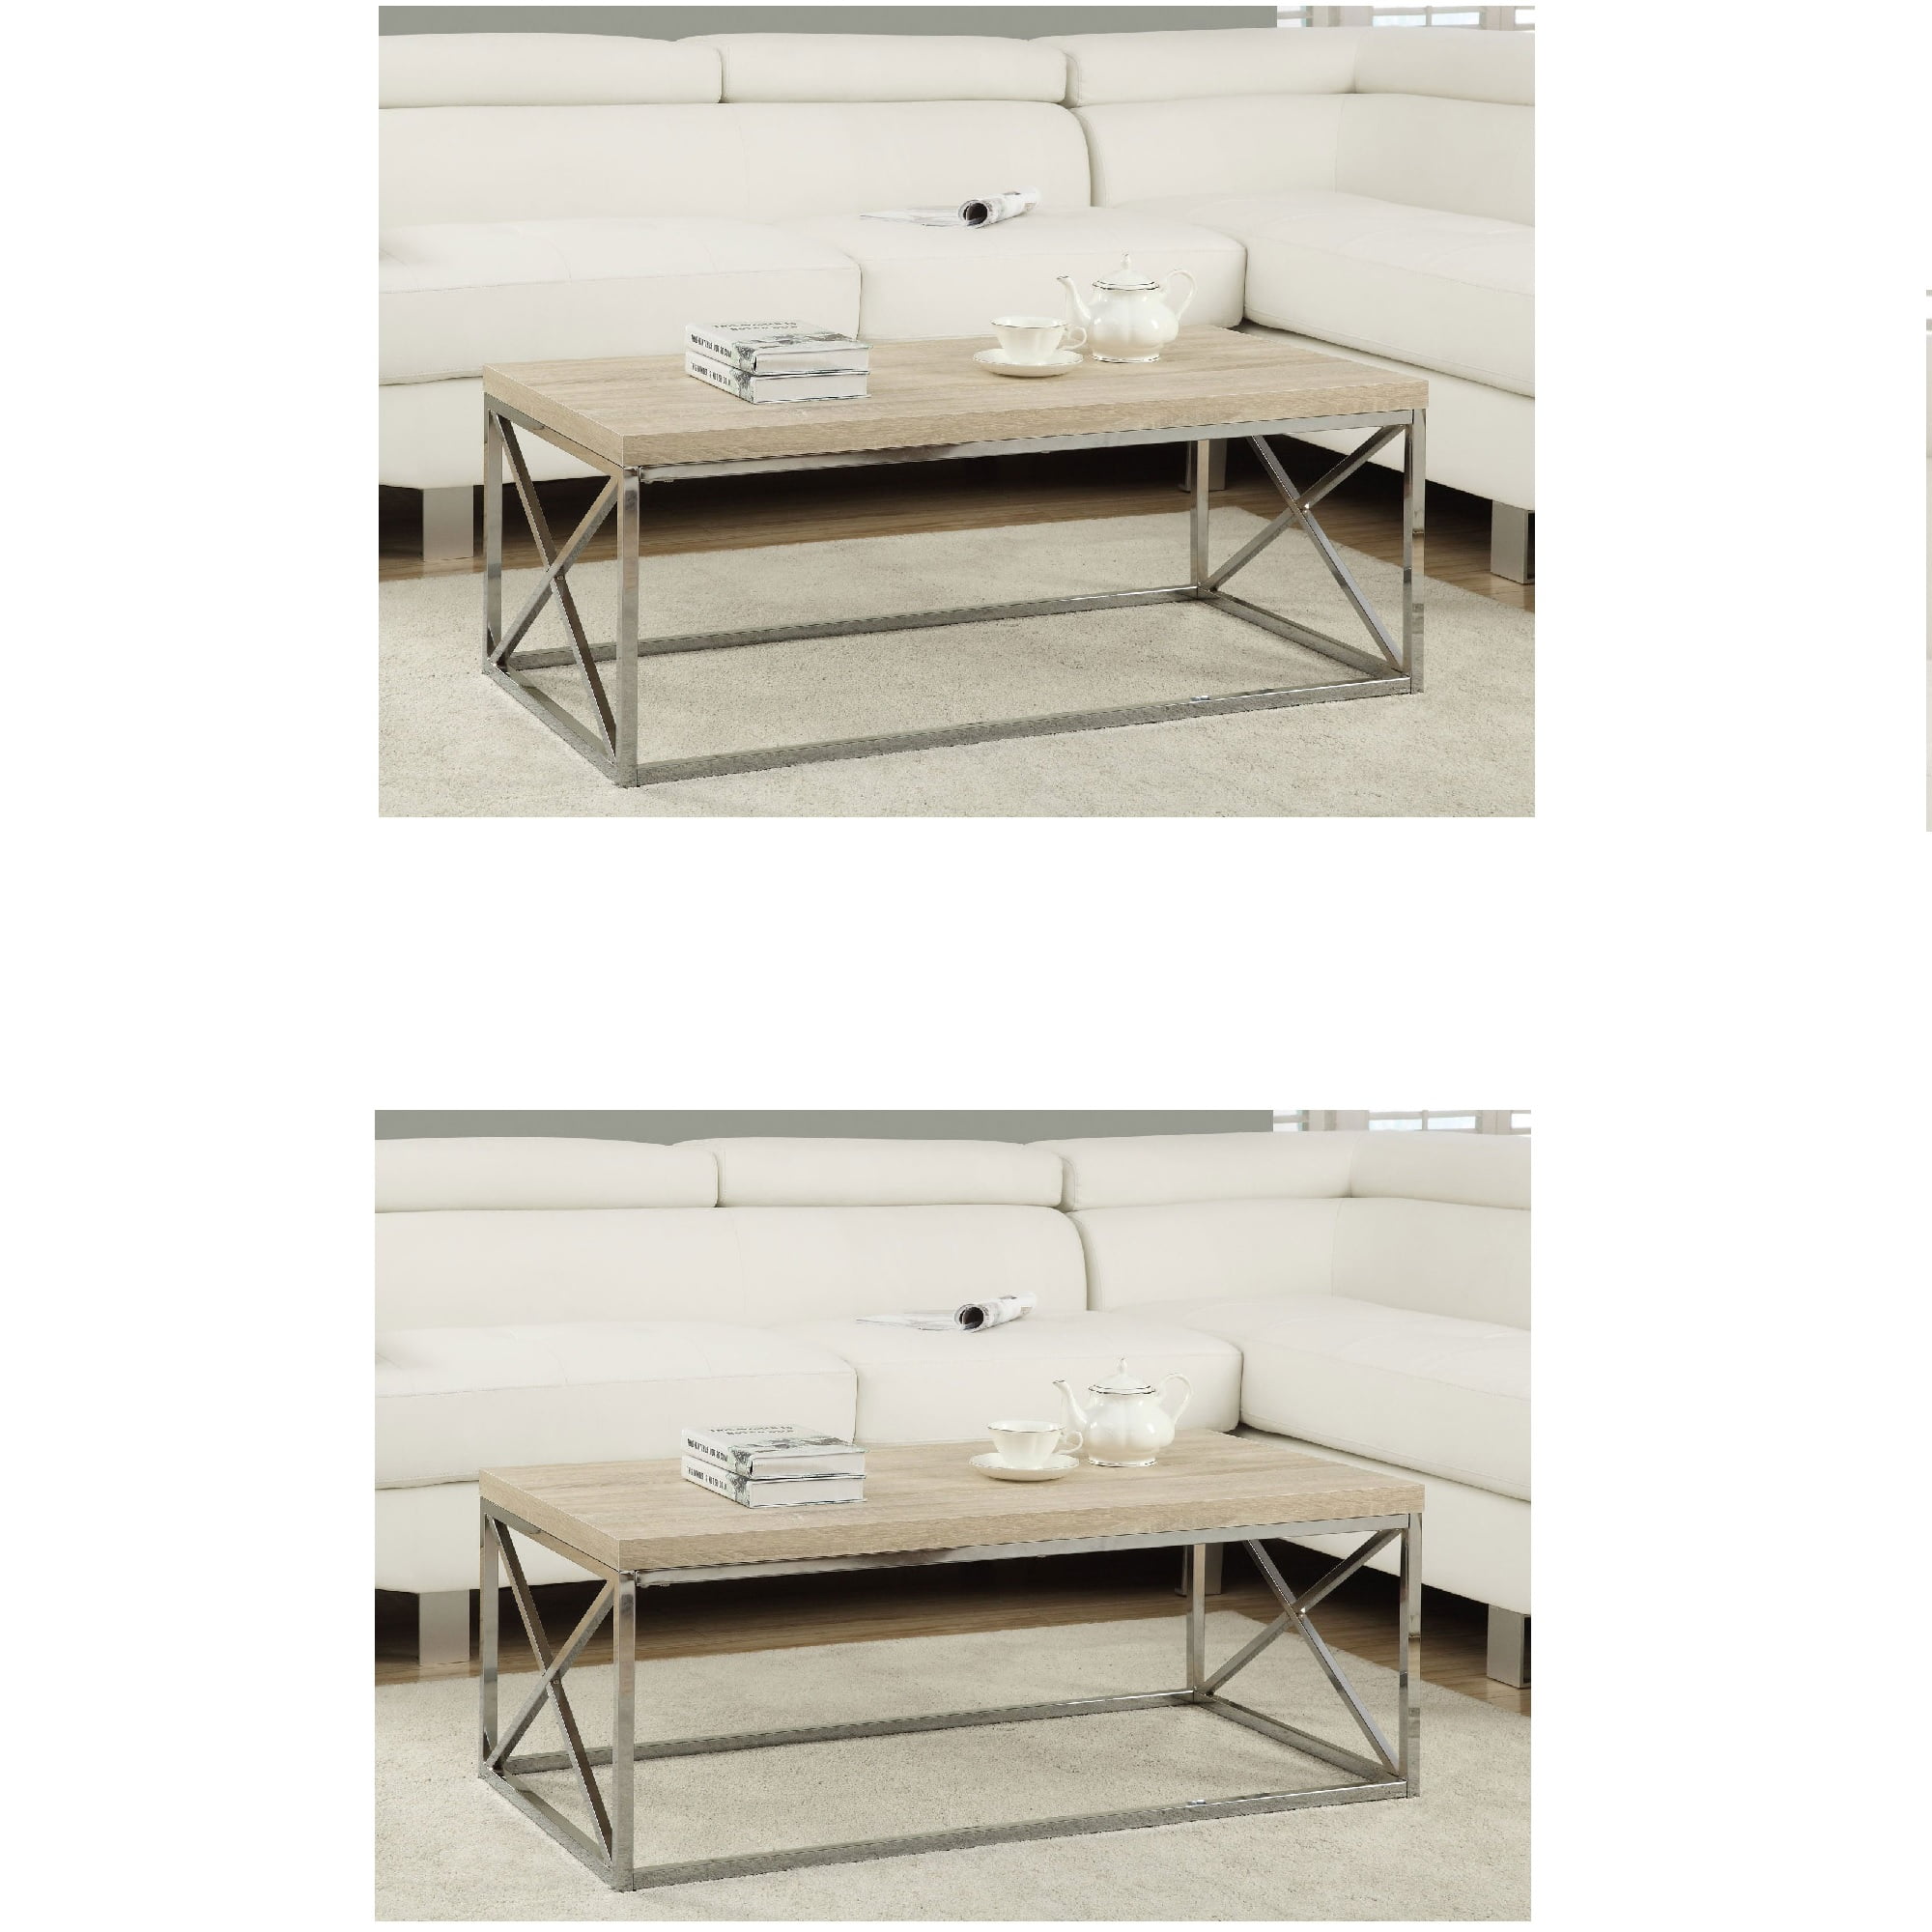 Details about   Monarch Natural Wood-Look Finish Chrome Metal Contemporary Design Coffee Table 